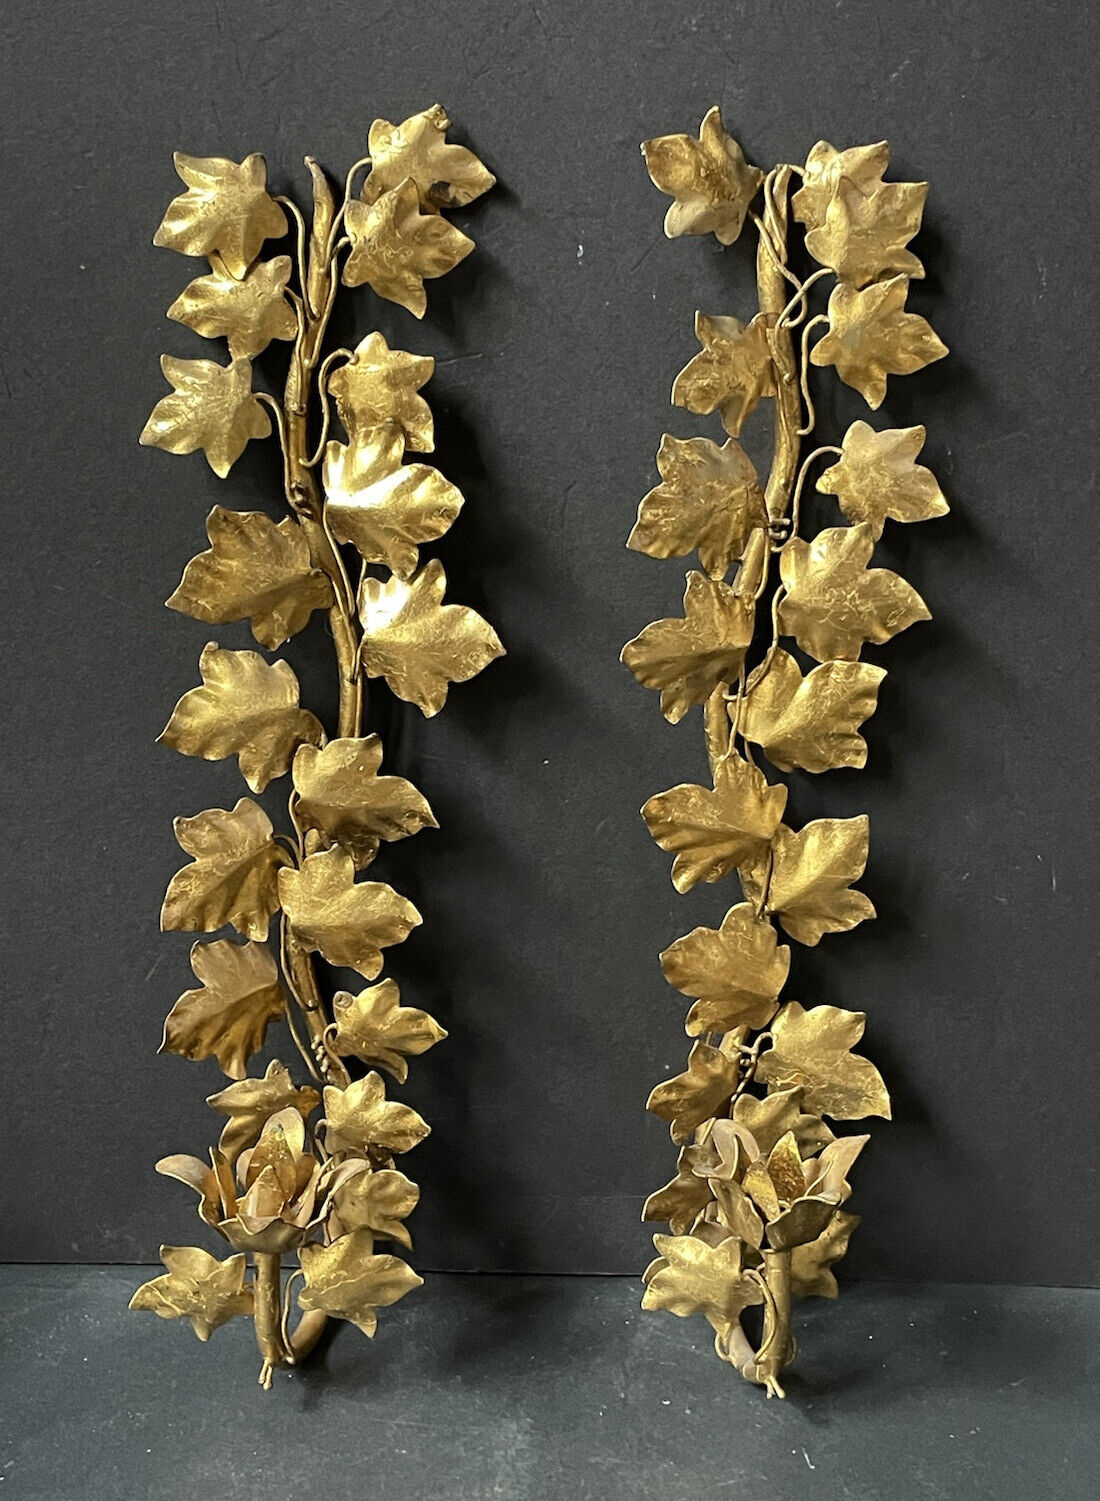 WOW! PAIR Vintage ITALY Candle SCONCES GOLD LEAVES Hollywood Regency Wall METAL Tanie popularne